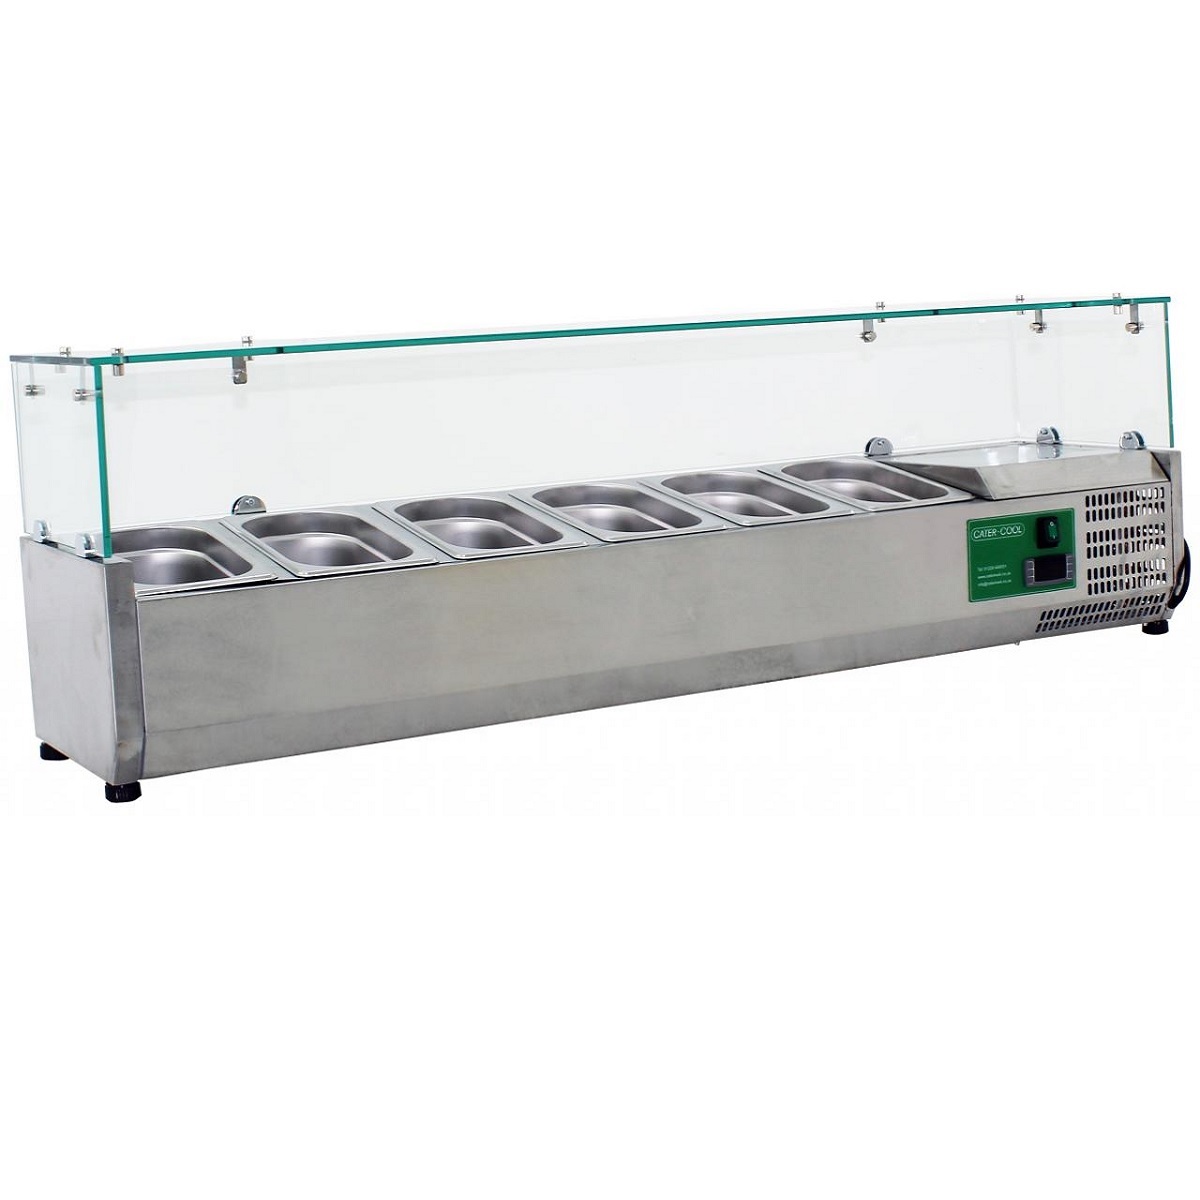 Cater-Cool CK1400TU Commercial Refrigerated Topping Unit - 6 x 1/4GN